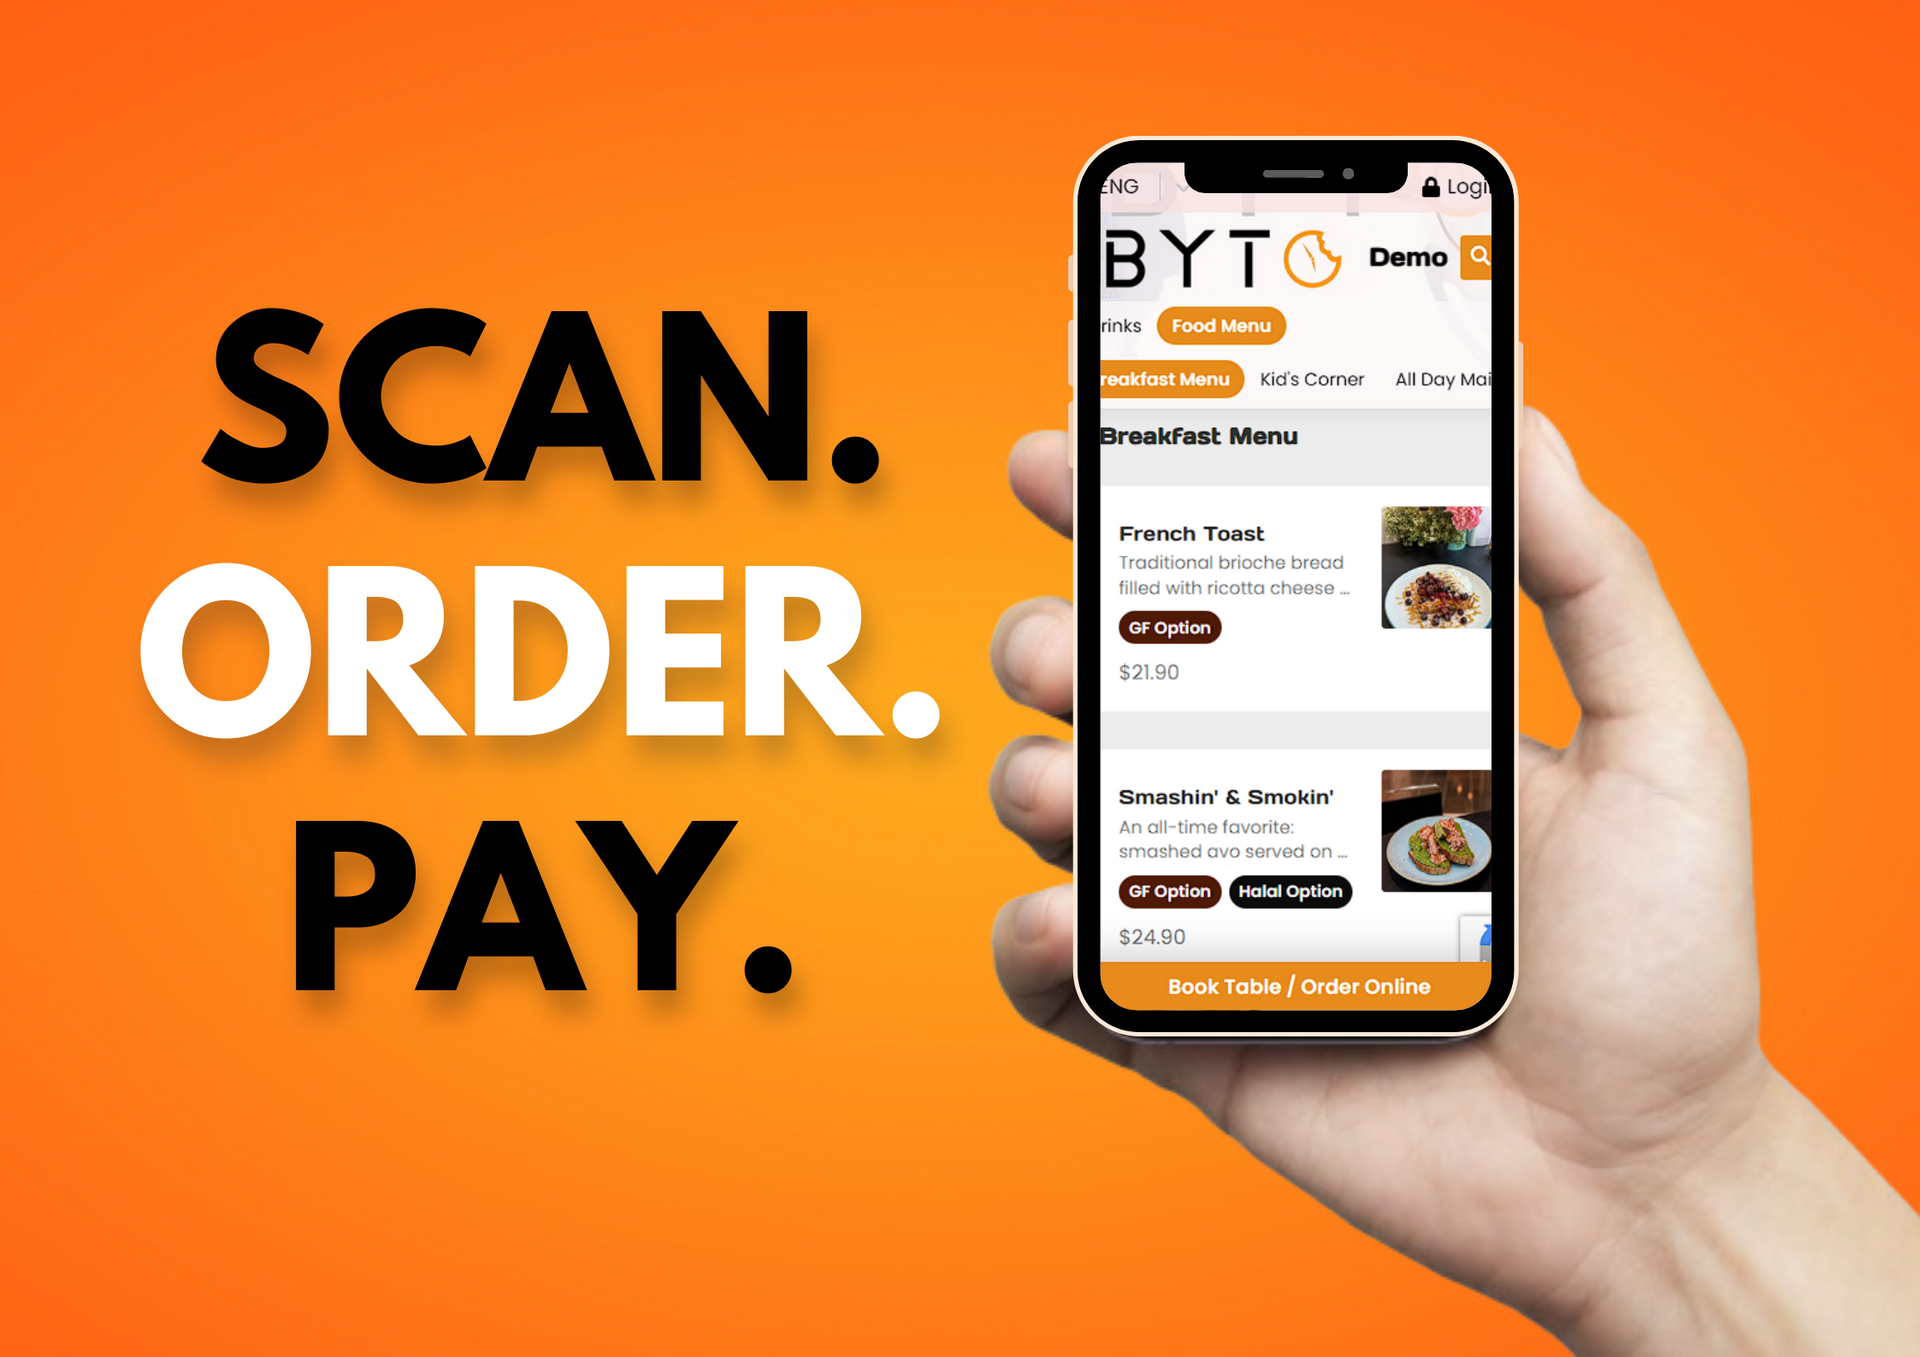 Scan Order and Pay with BYTO